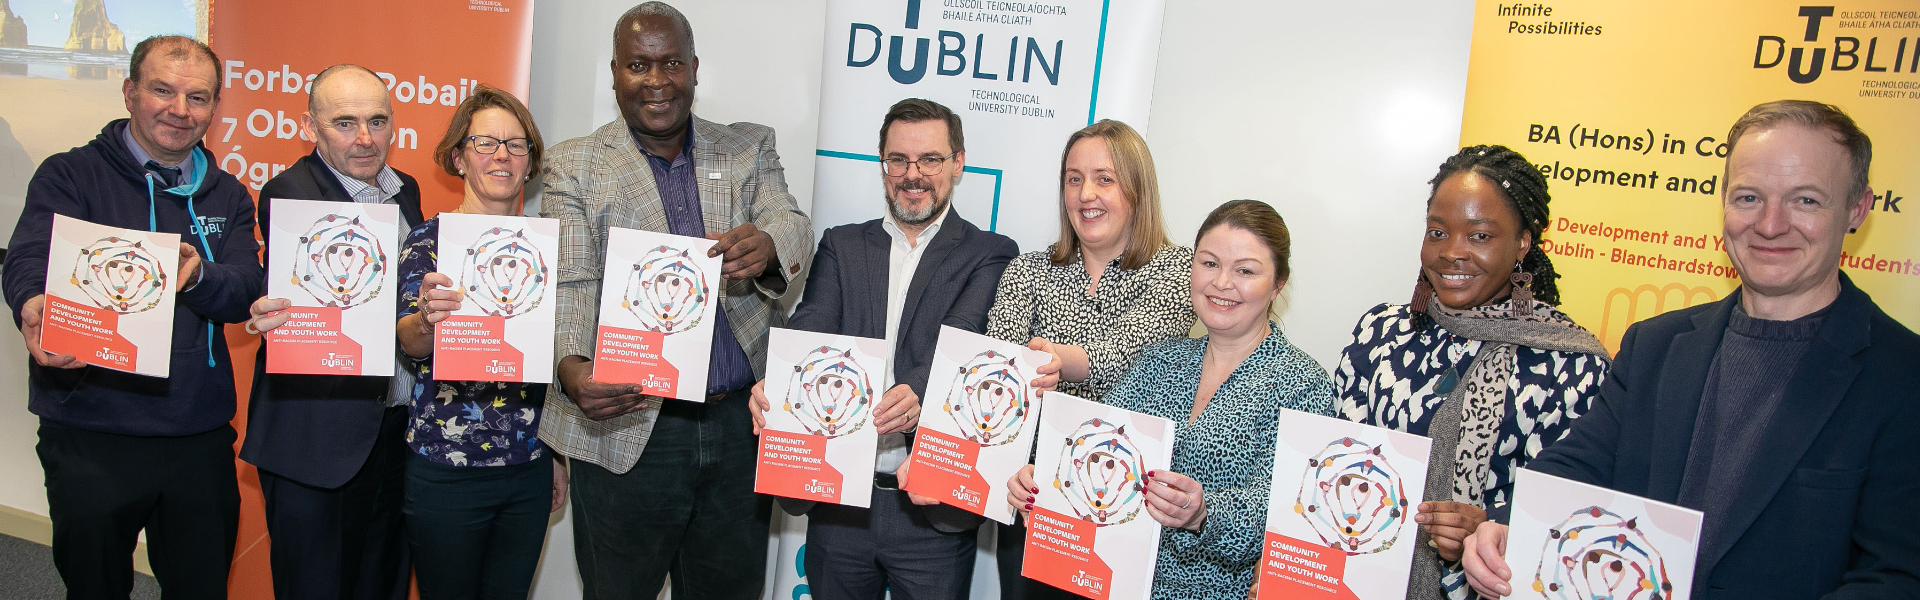 TU Dublin staff members in a line, each holding the Anti Racism Placement Resource document